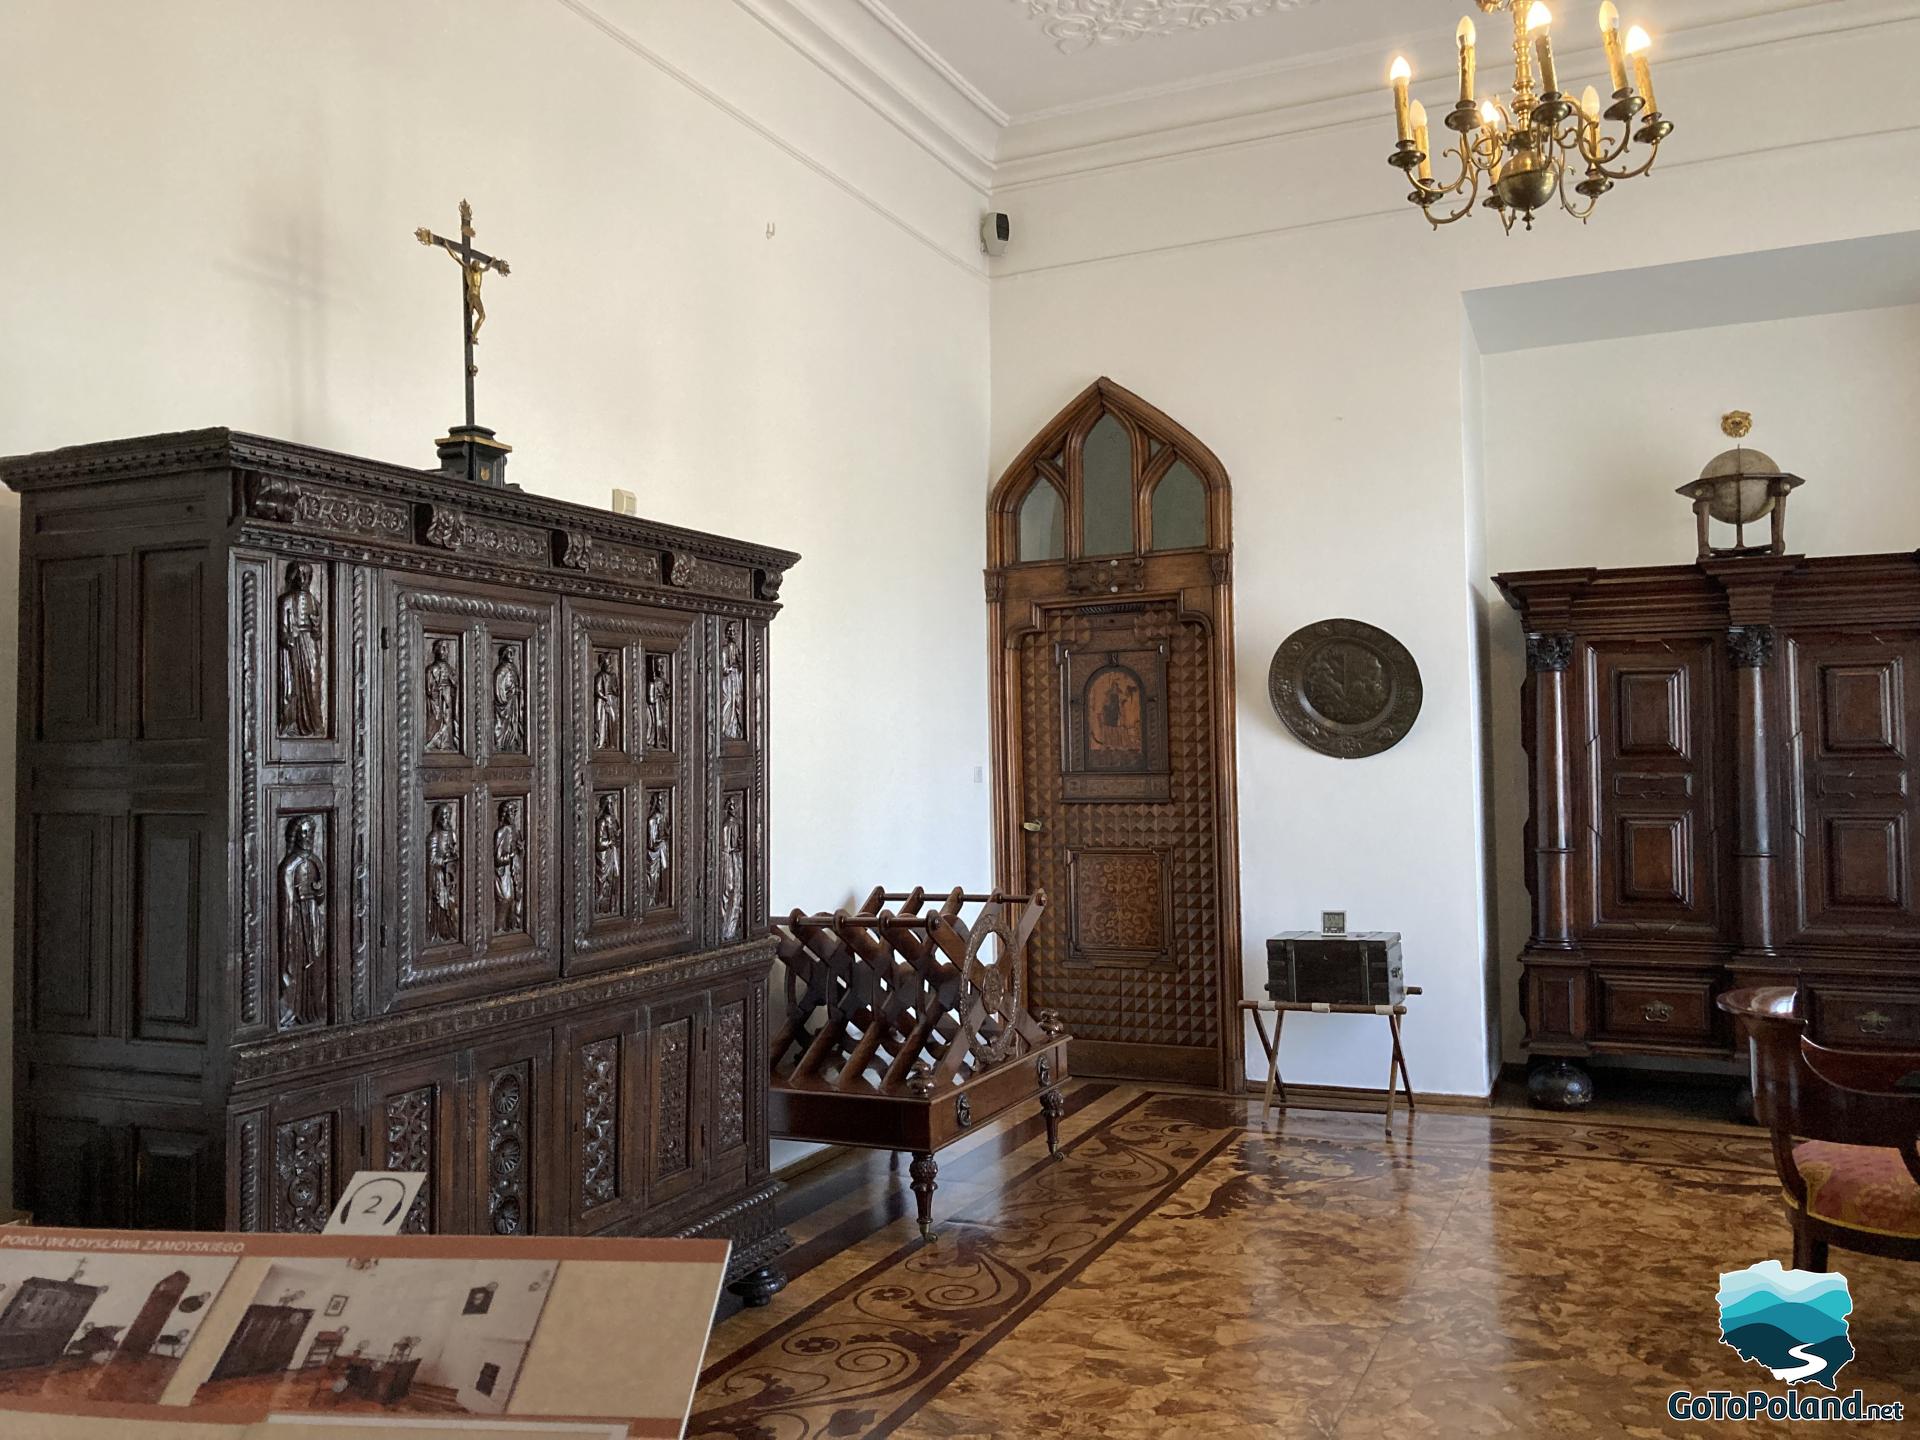 A room with wooden furniture, an oak wardrobe and an inlaid floor